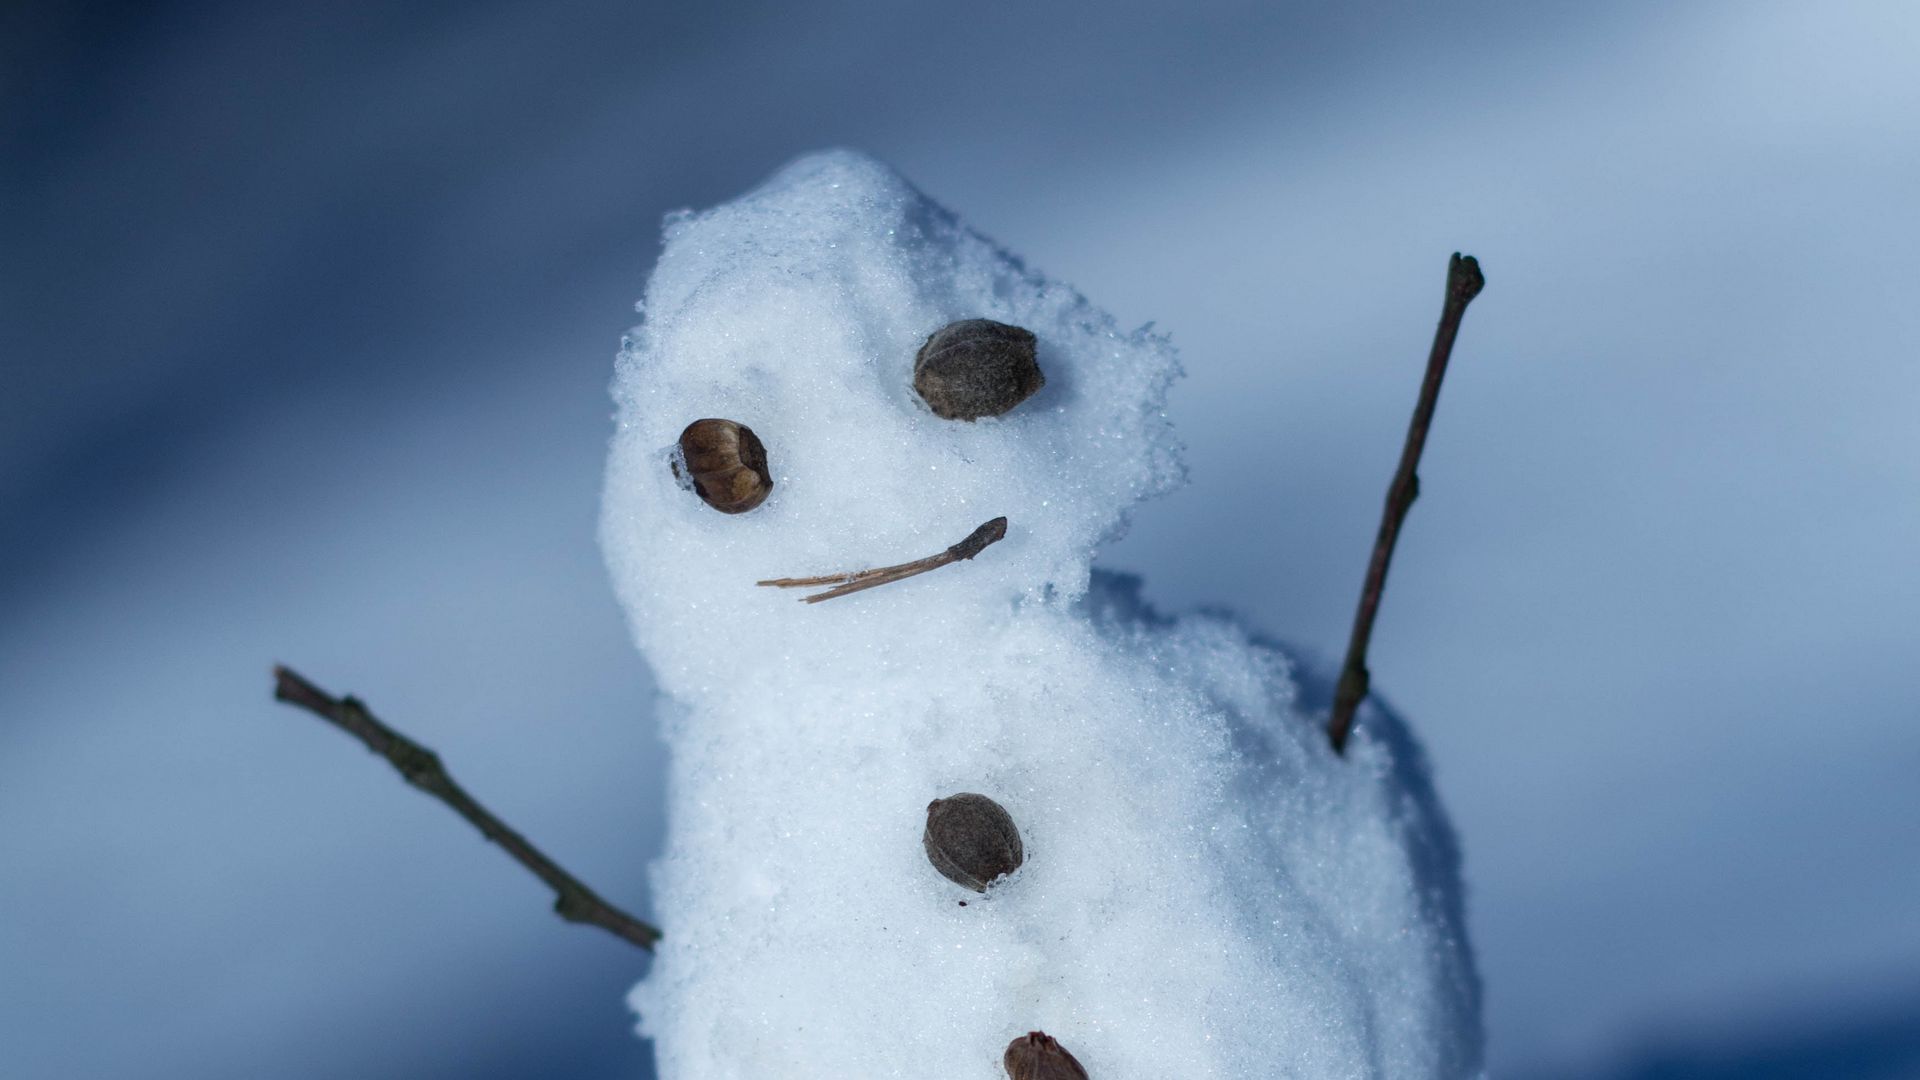 snowman photography in hd